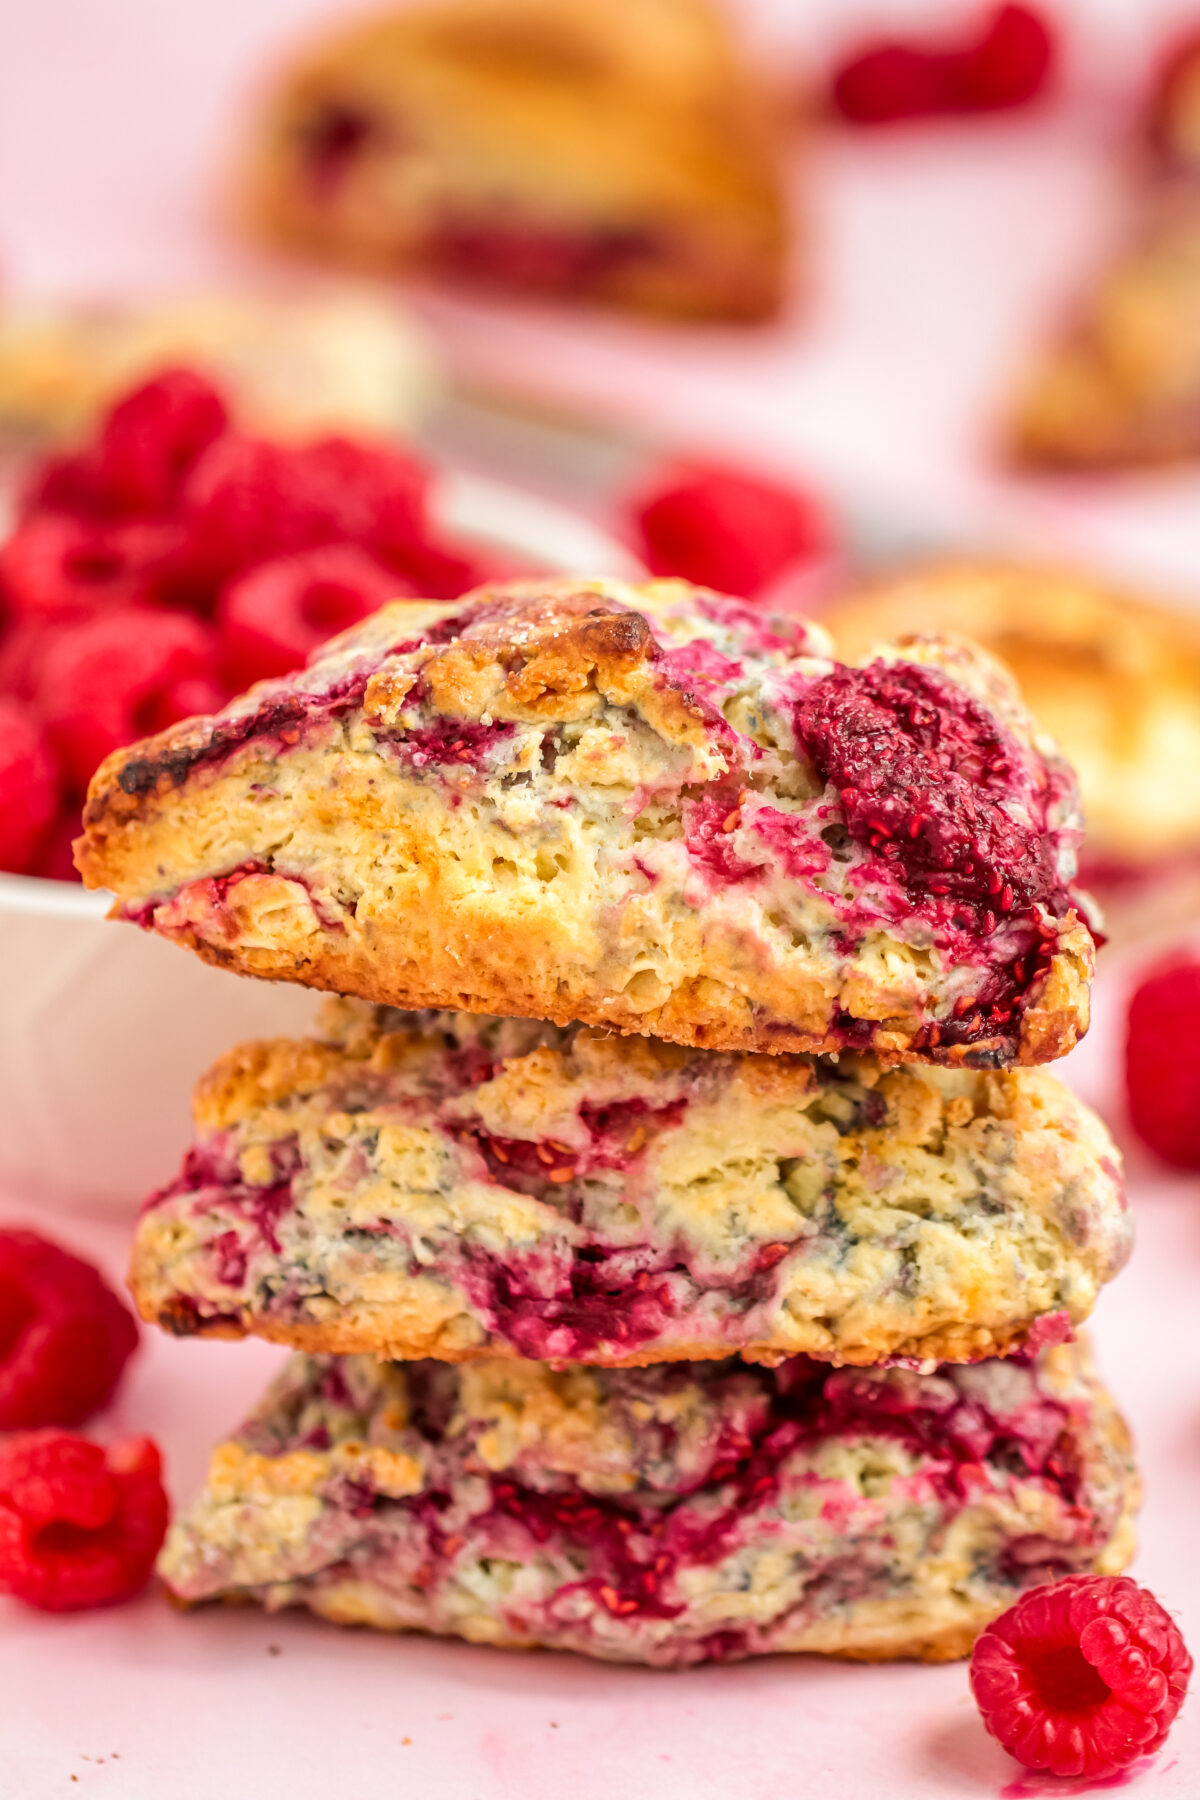 This scrumptious recipe for raspberry scones results in homemade scones that are light and fluffy with a crisp crust and tart raspberries!